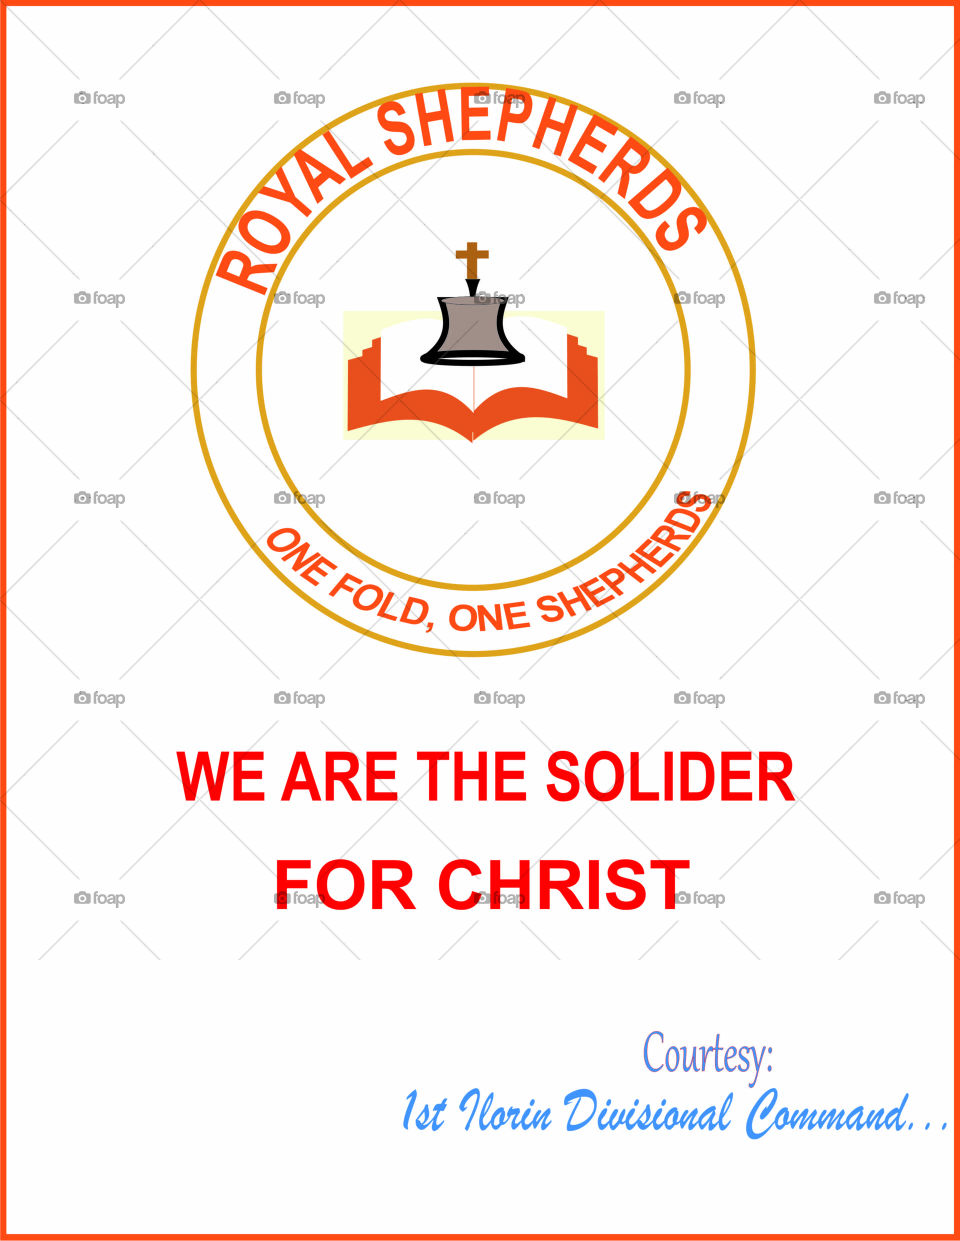 yes we're really solider for Christ.